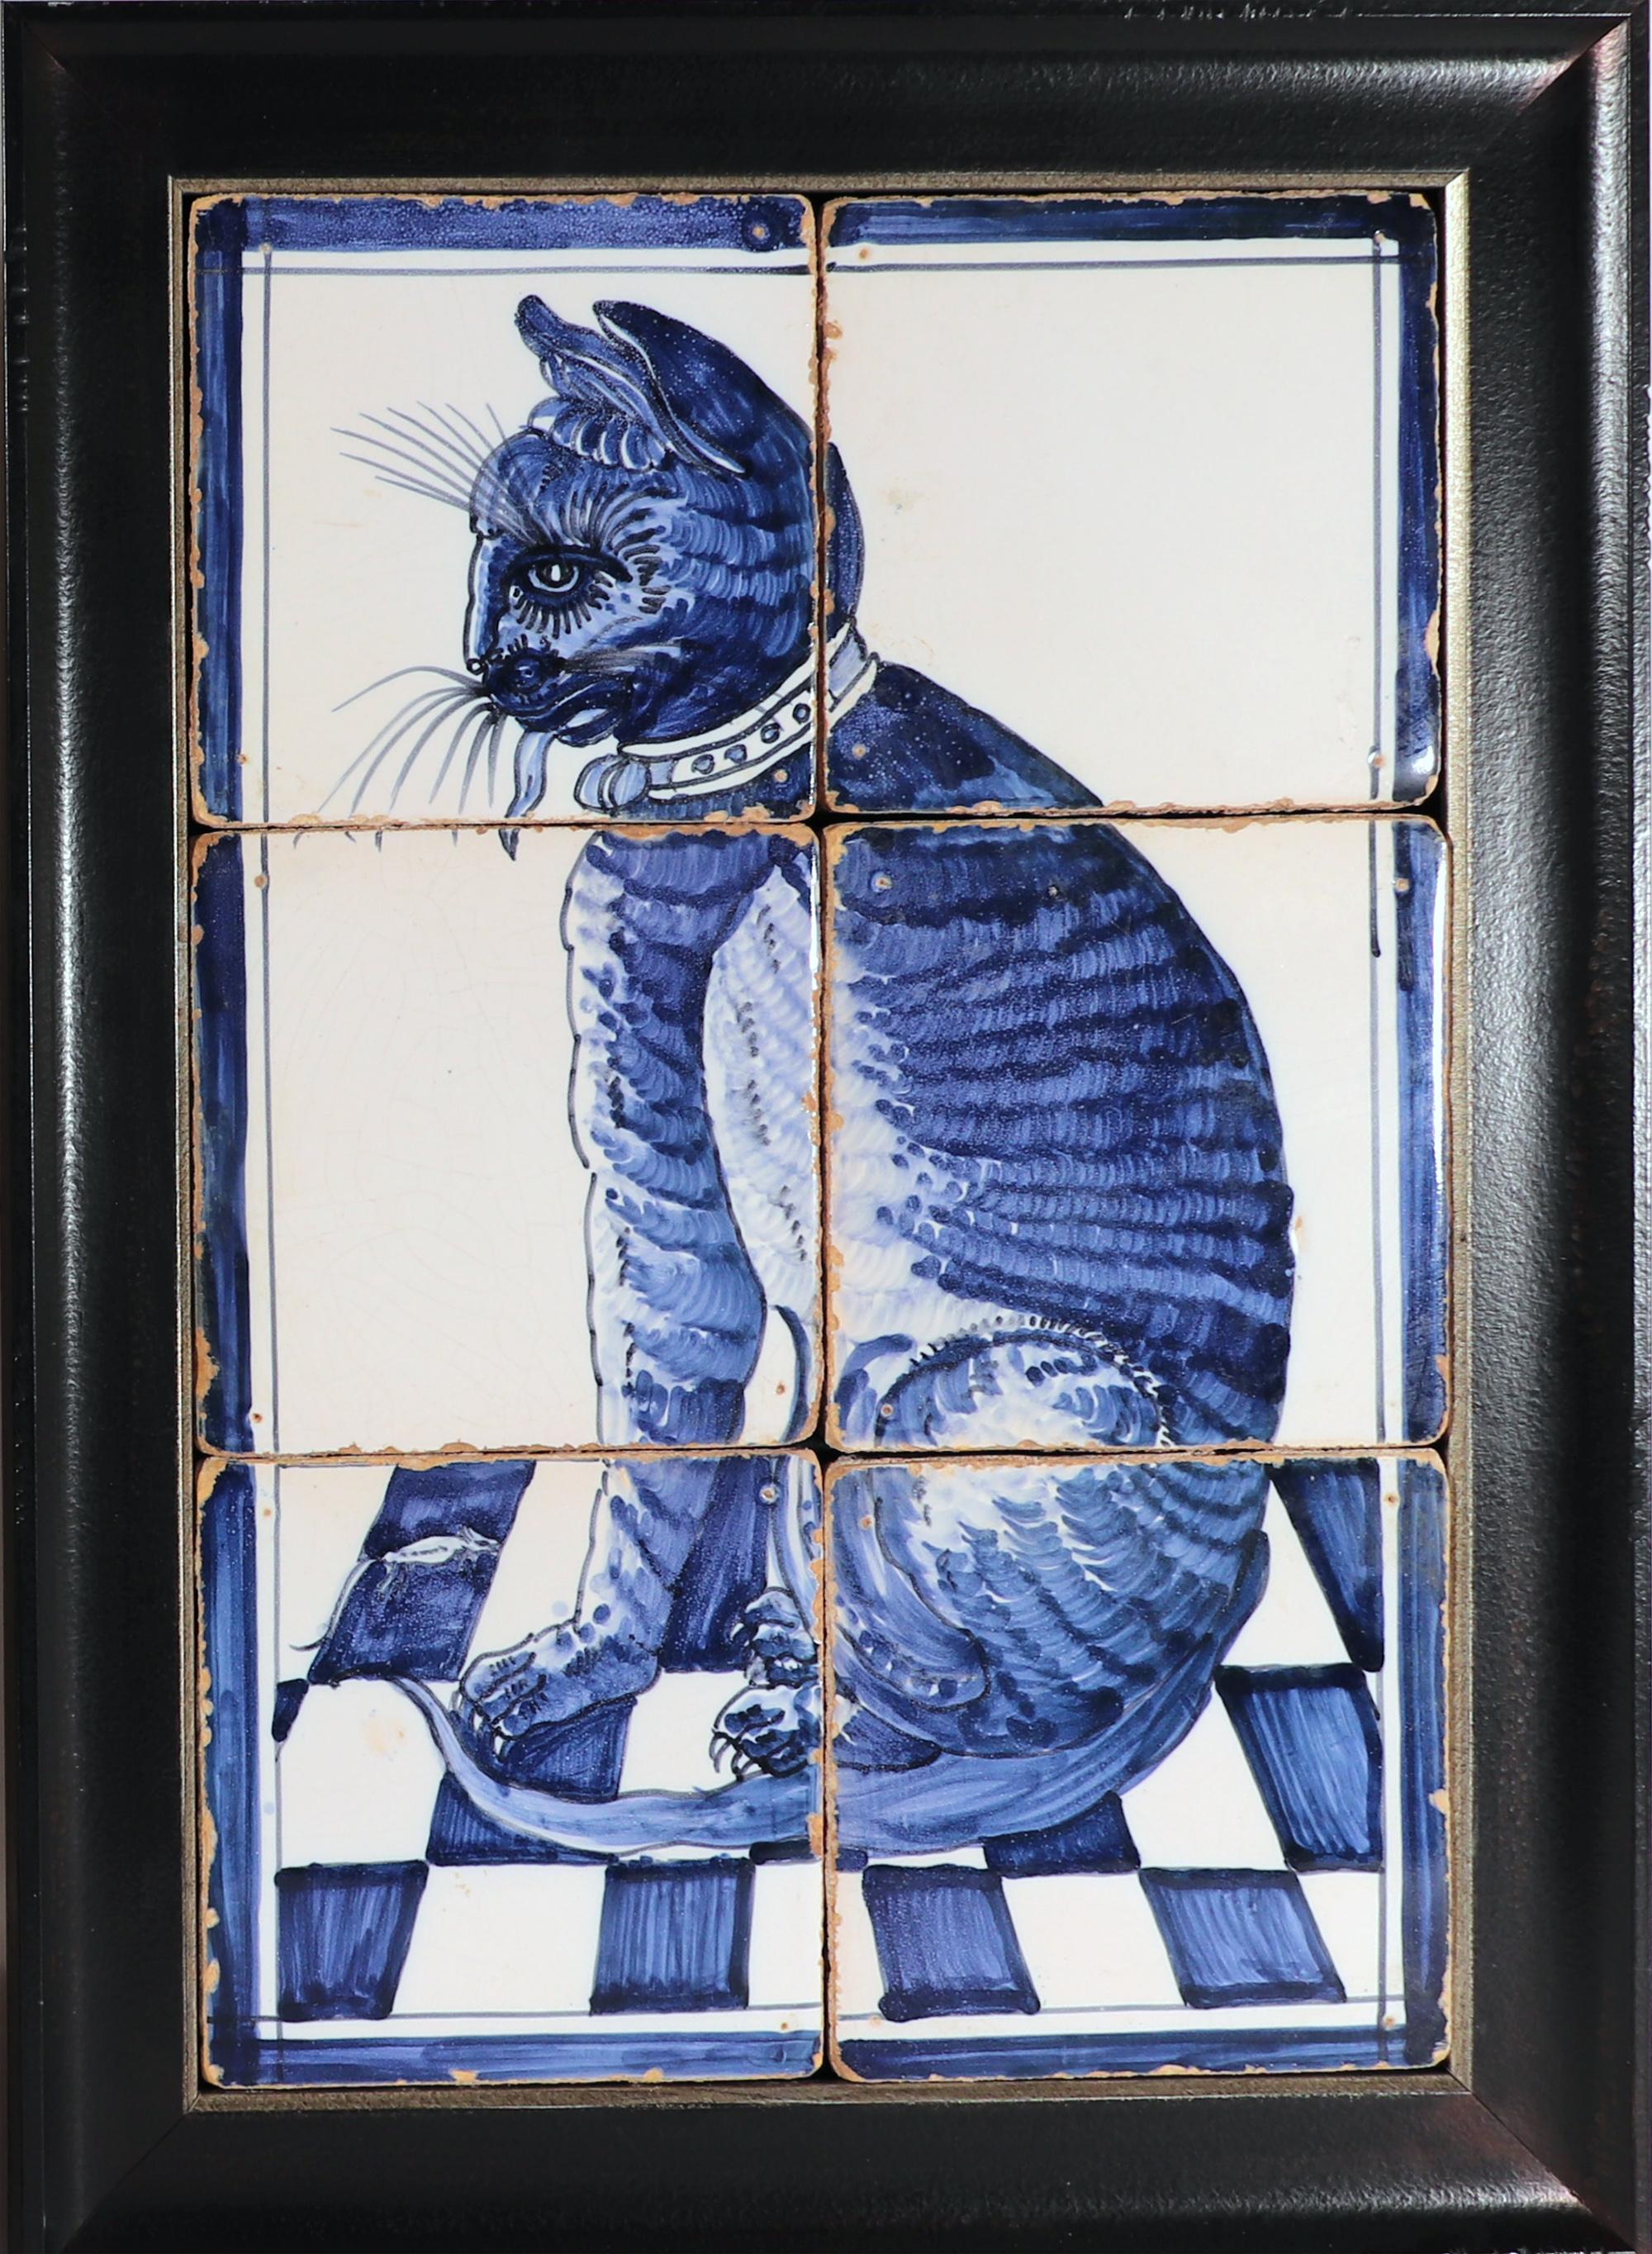 18th Century Dutch Delft Blue & White Cat Six Tile Cat Pictures,
Mid-18th Century.

The Dutch Delft six-tile pictures are painted in blue and white with two cats facing each other as they sit on their haunches on a checkerboard Tile floor.  They